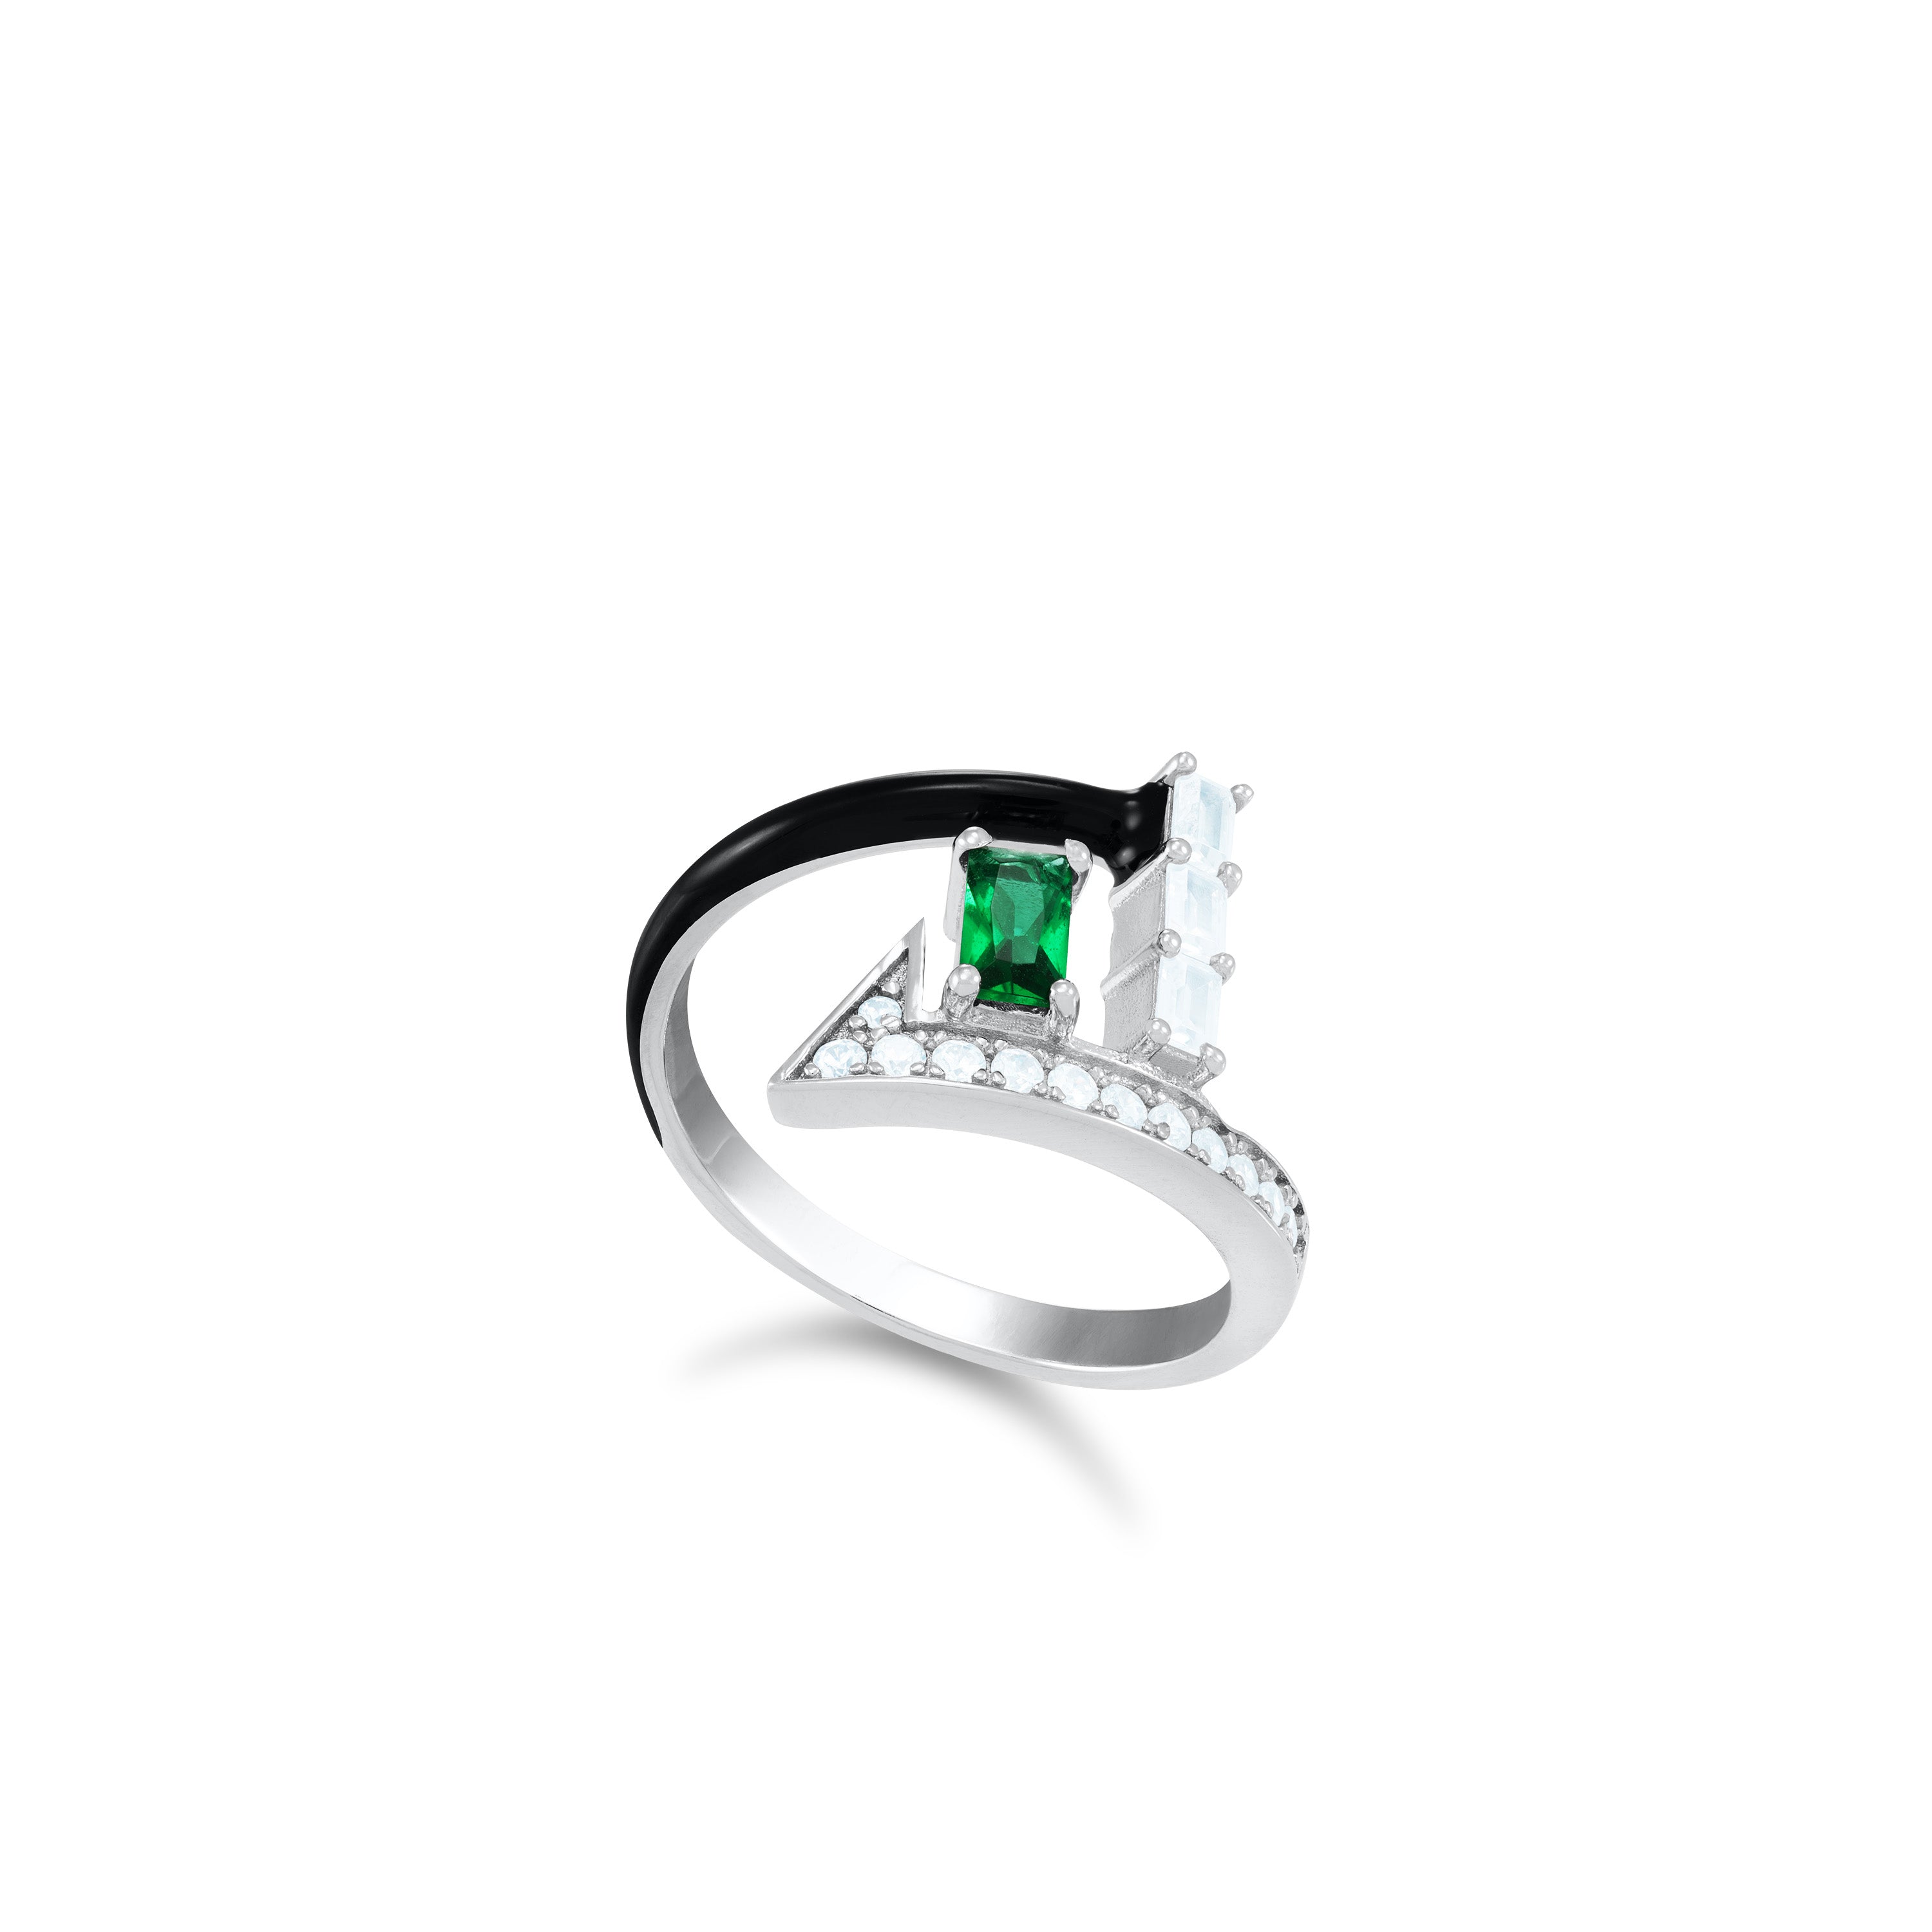 Pave Rectangle With Enamel And Stones Ring